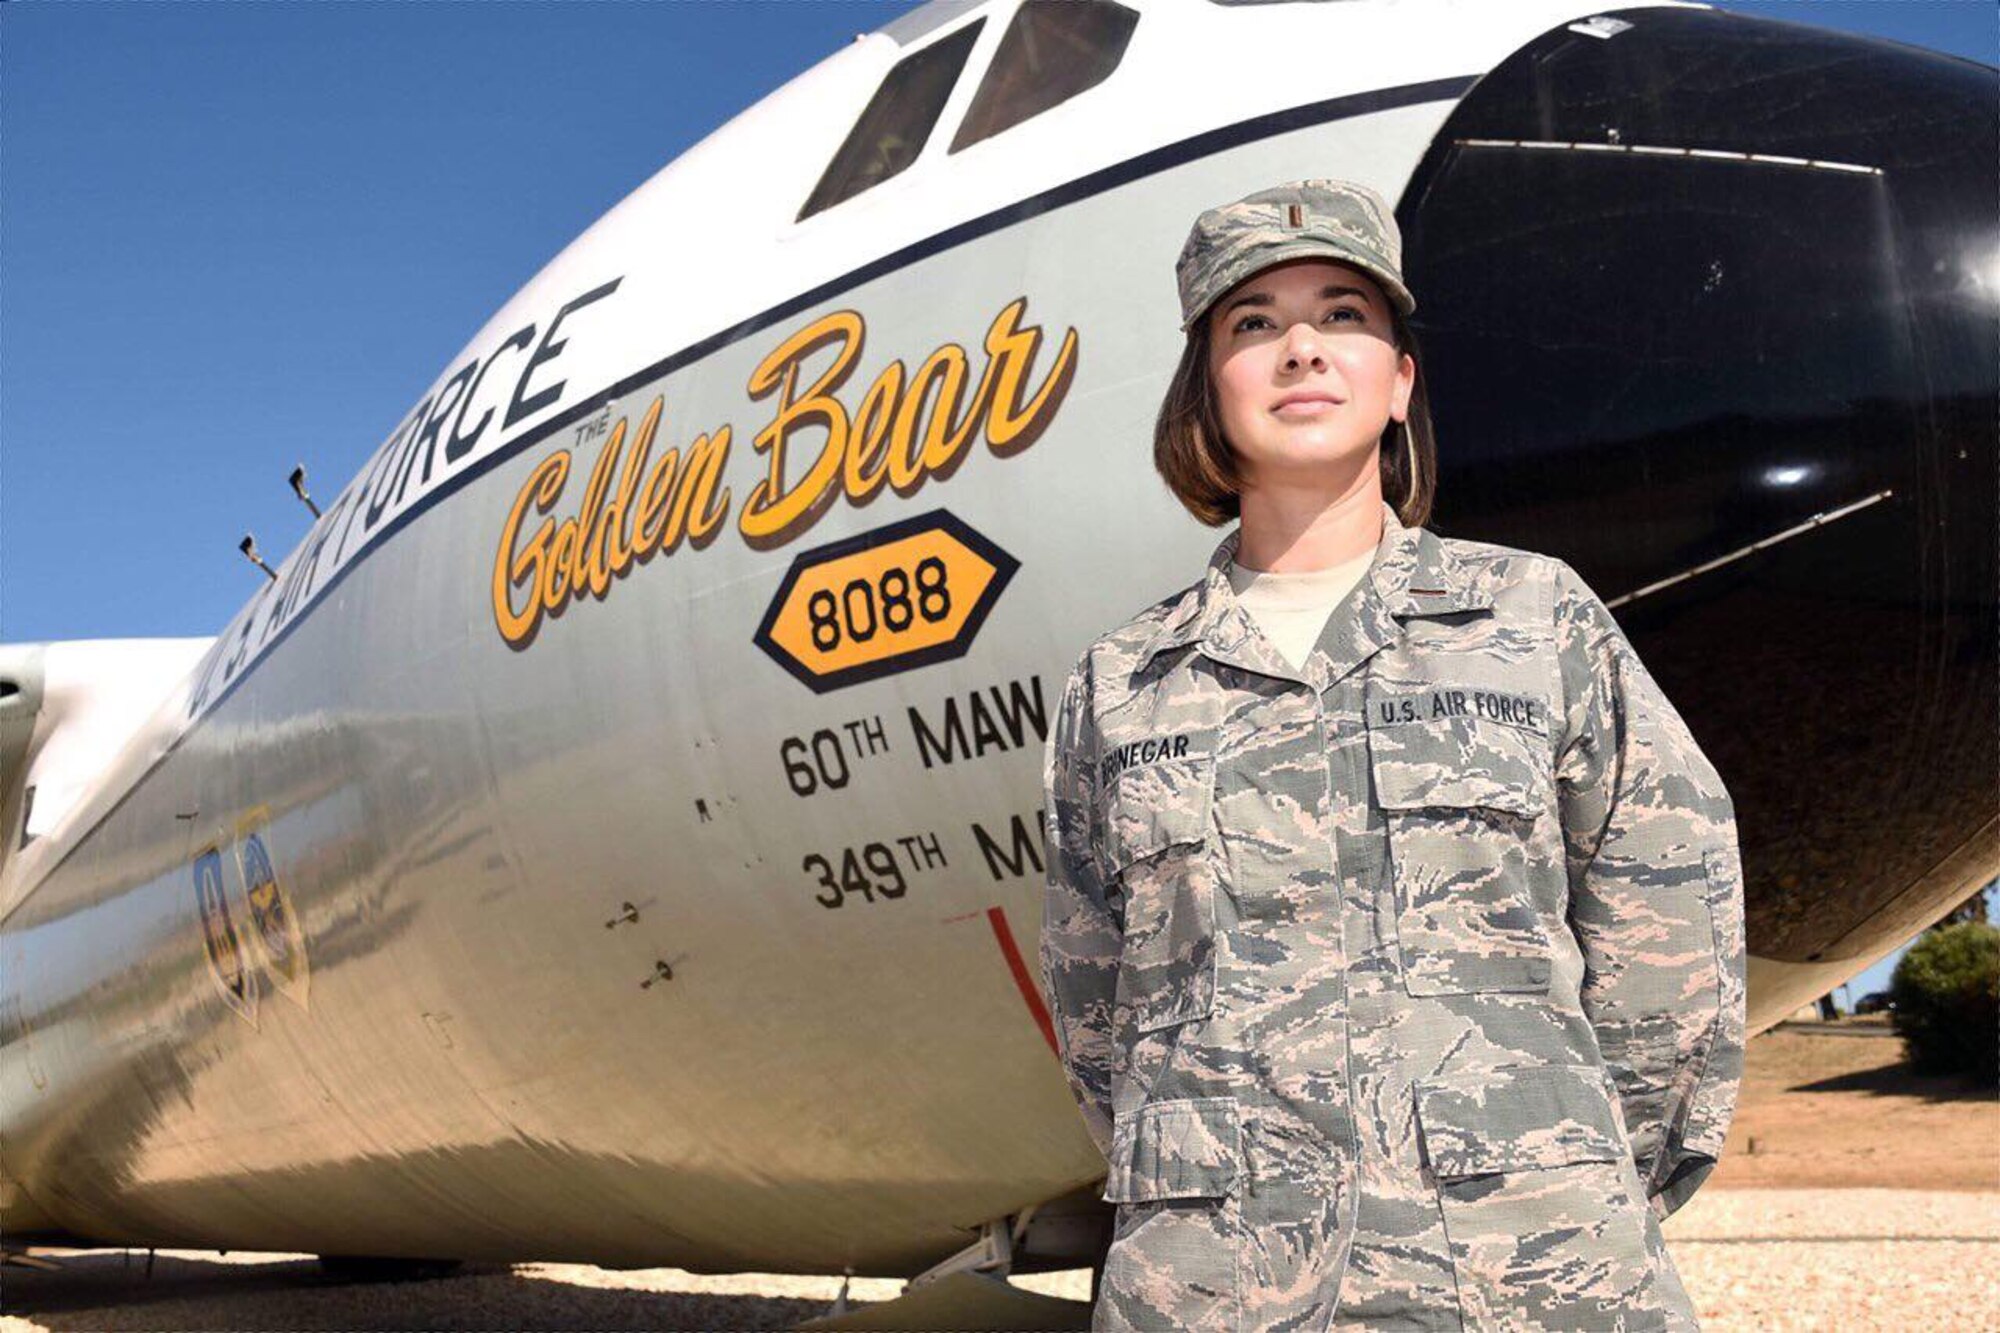 2nd Lt. Rachel Brinegar, 60th Air Mobility Wing public affairs officer, poses in front of a C-141 Starlifter, "Golden Bear," a Travis Air Force Base, Calif., landmark Oct. 25. Brinegar's first assignment as an officer is at Travis, where reconciling the roles of supervisor and executive has required, she said, "a big change in mindset."